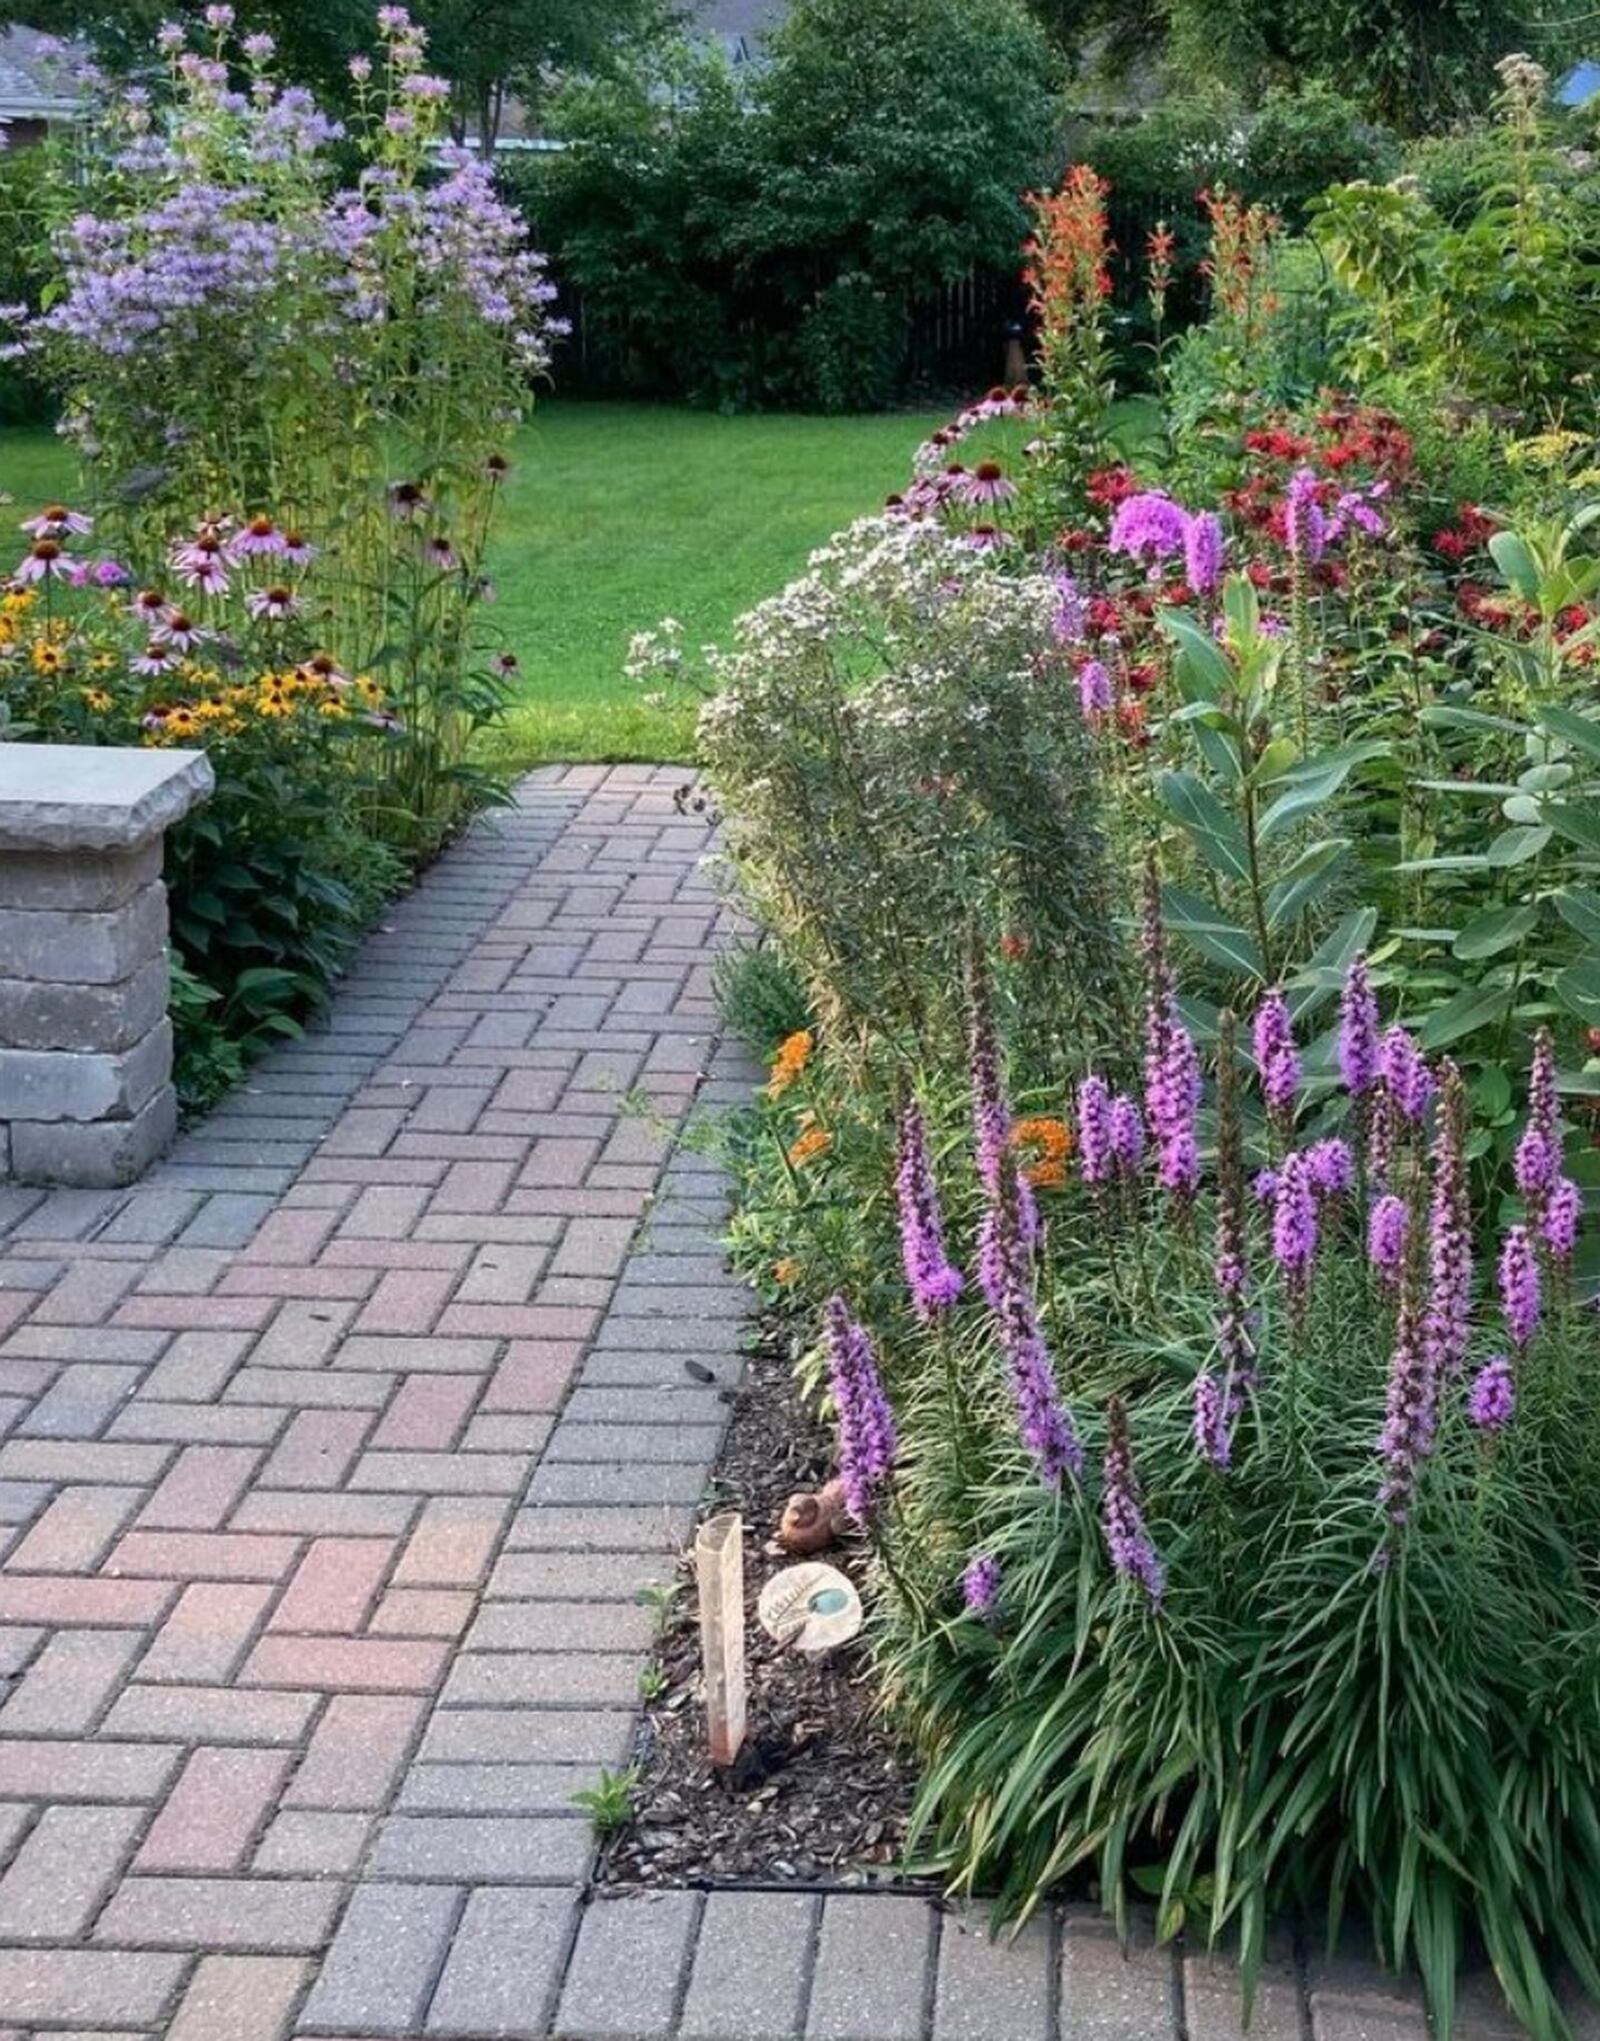 Downers Grove Garden Walk returns for 17th year July 15 Shaw Local